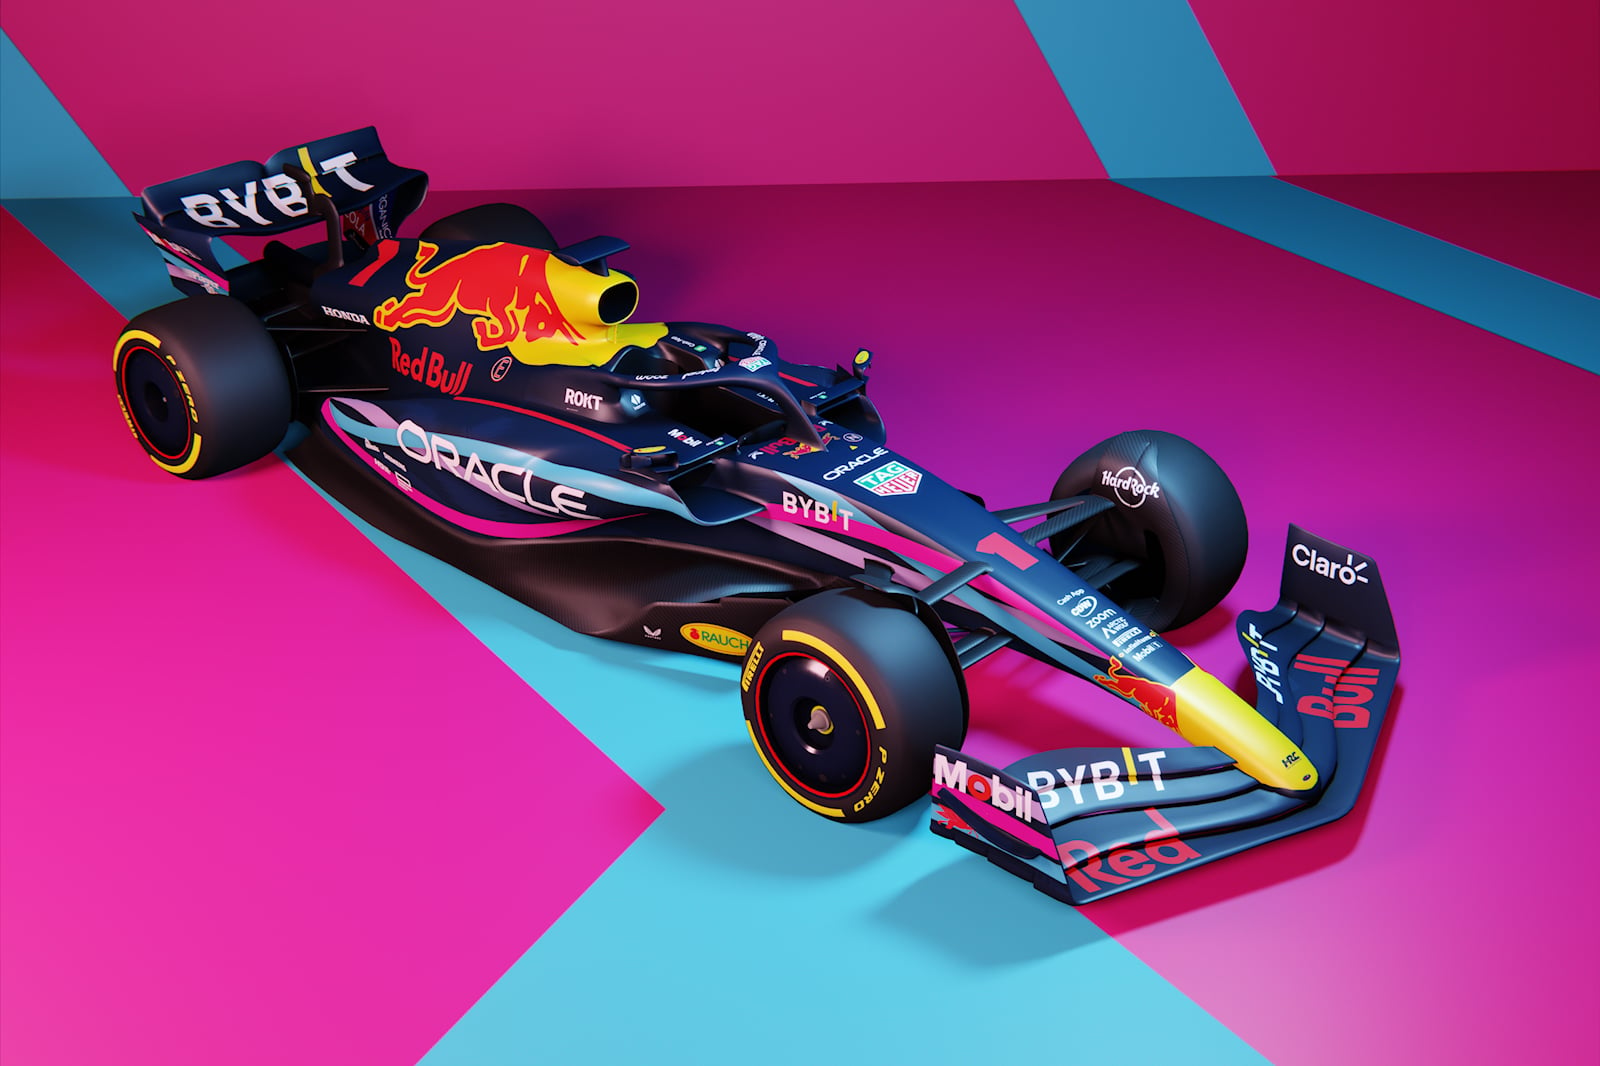 Red Bull Racing Reveals Winning Fan-Designed F1 Livery For Miami